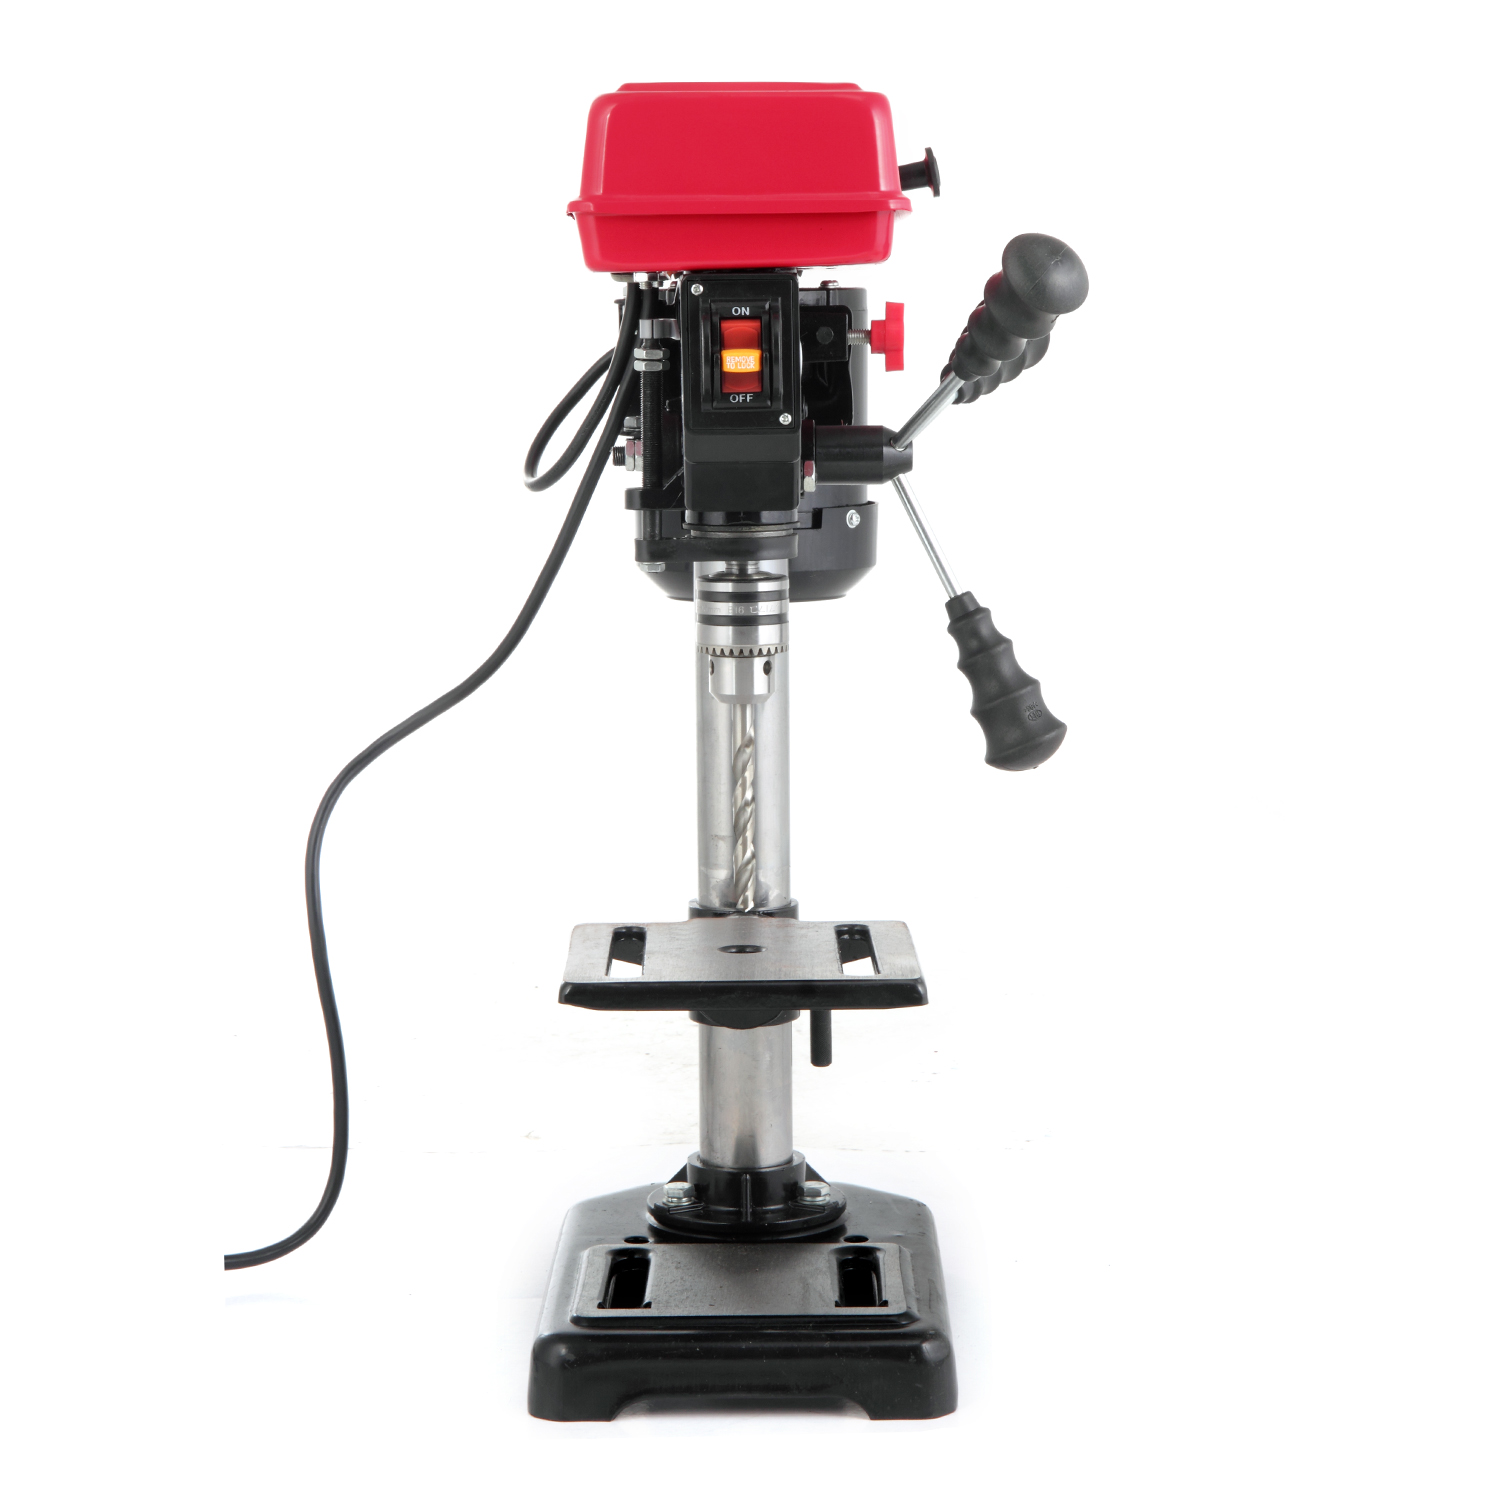 Hyper Tough 2.4 AMP Corded 8 inch Drill Press, 1/2 inch Chuck, 5 Speed with Depth Stop and Three Stem Handle - image 2 of 11